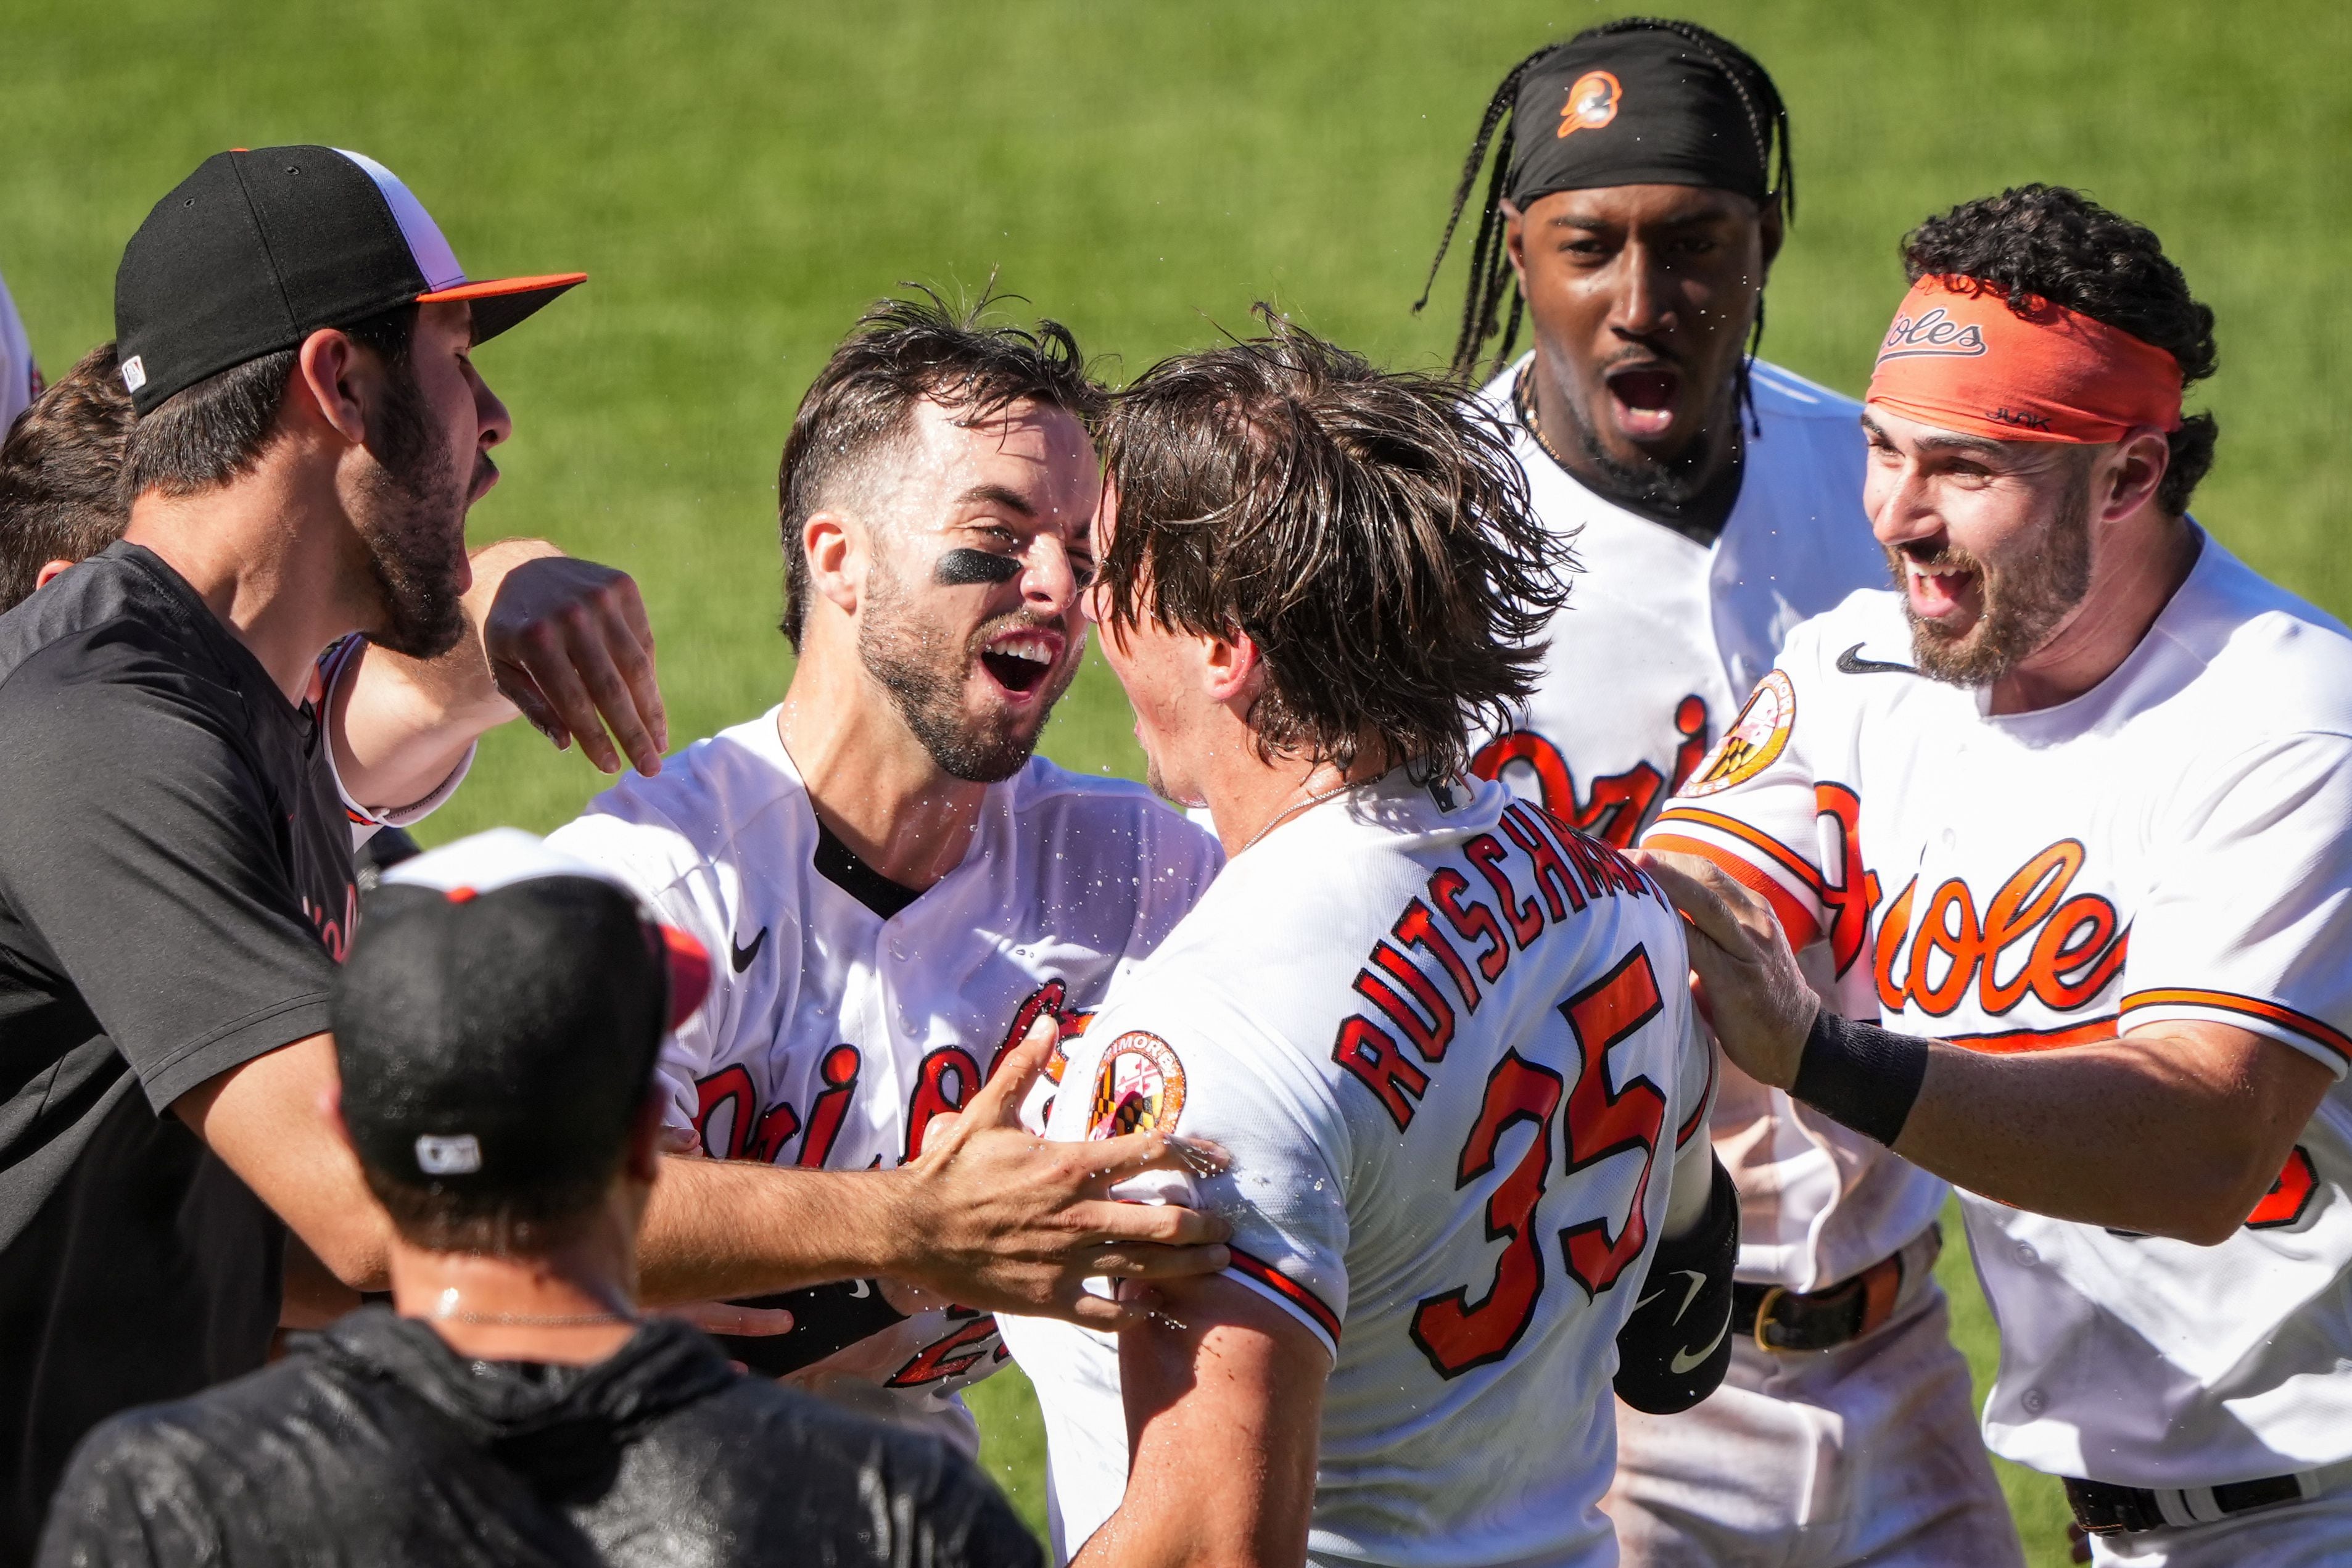 Baltimore Orioles: Huge Moments Highlight O's Win in Sarasota